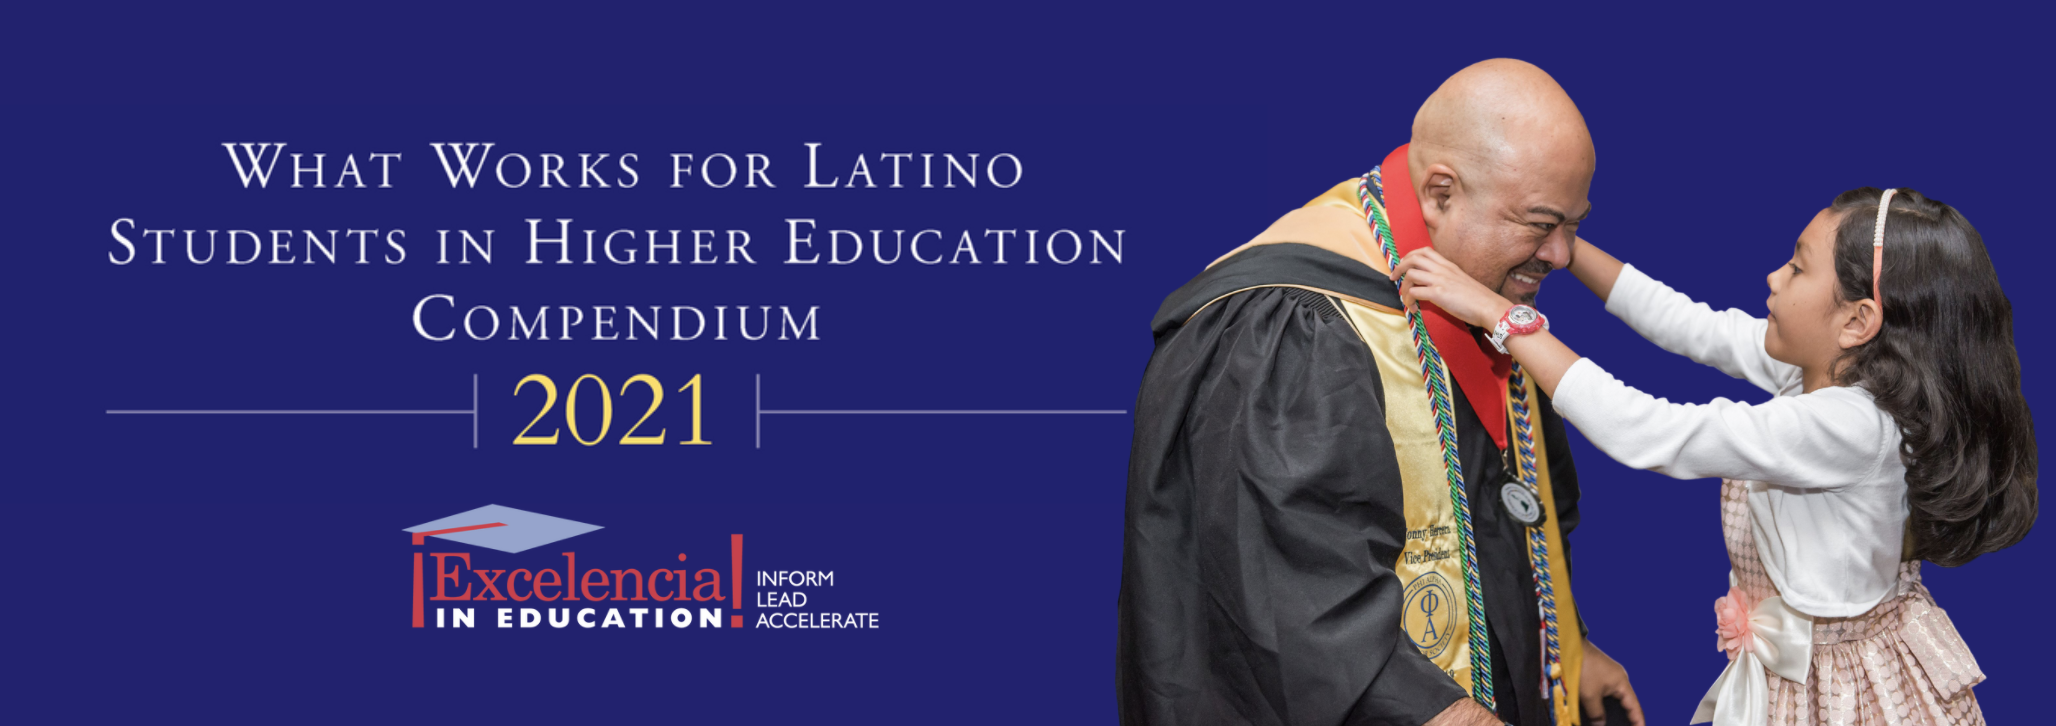 Graphic-2021 What Works For Latino Students in Higher Education